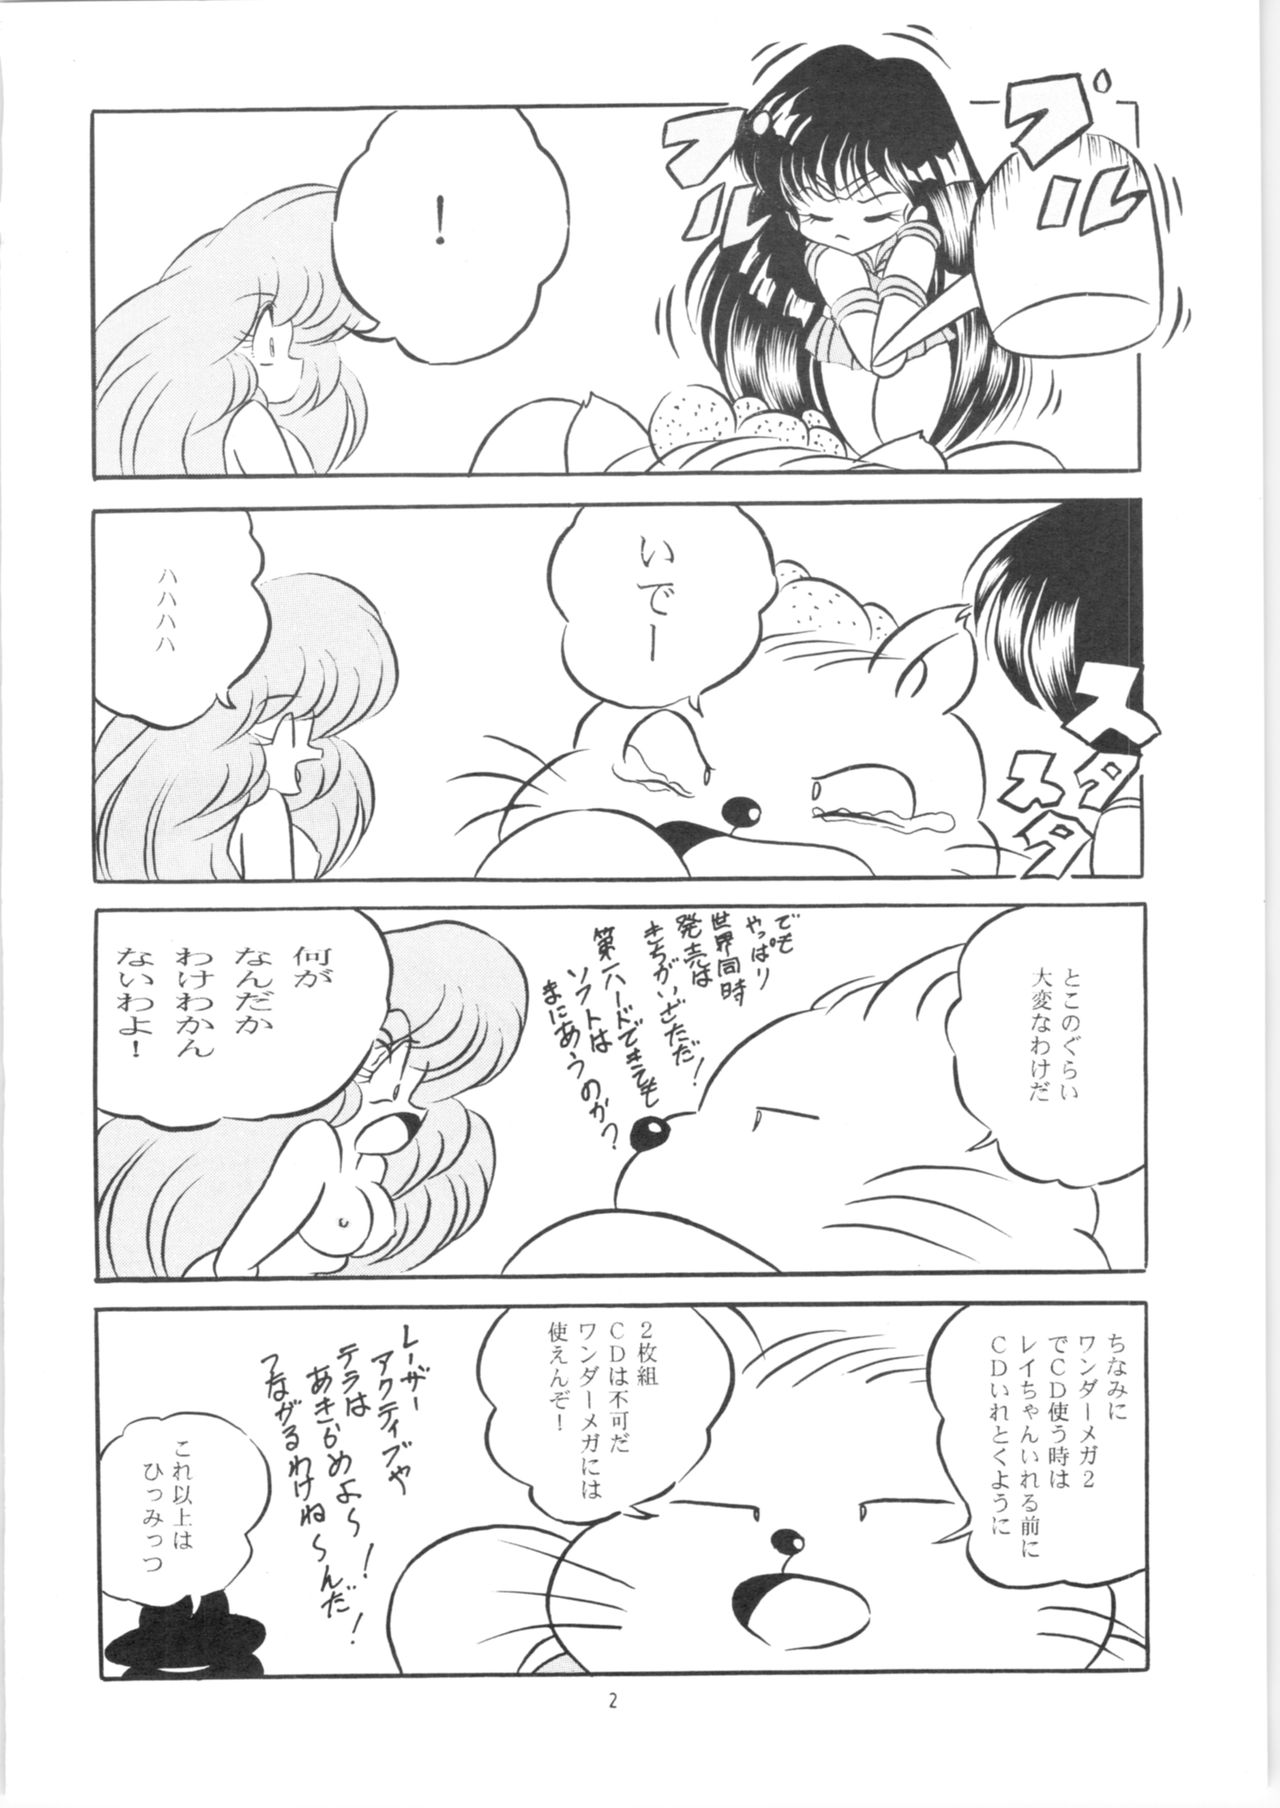 [C-COMPANY] C-COMPANY SPECIAL STAGE 14 (Ranma 1/2) page 3 full